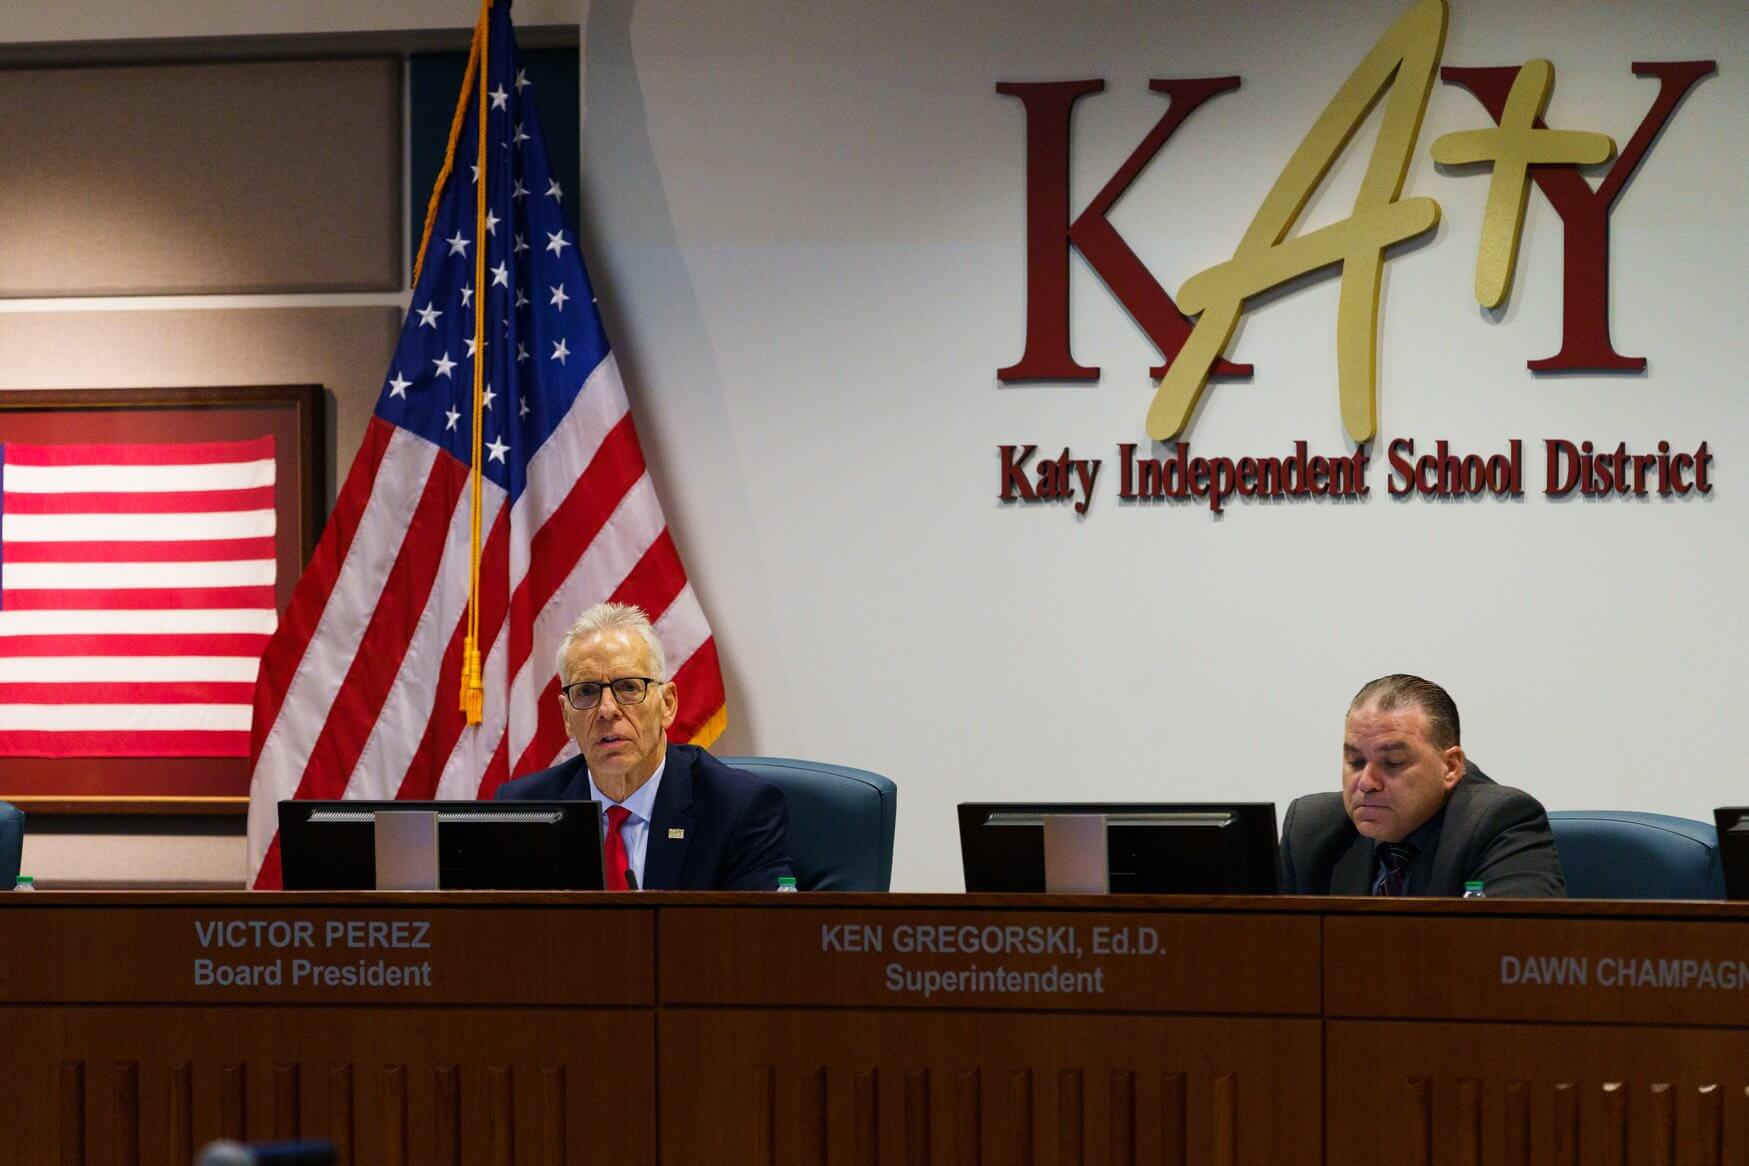 The Katy ISD board is considering a new policy that would require school employees to notify parents if students identify as transgender.